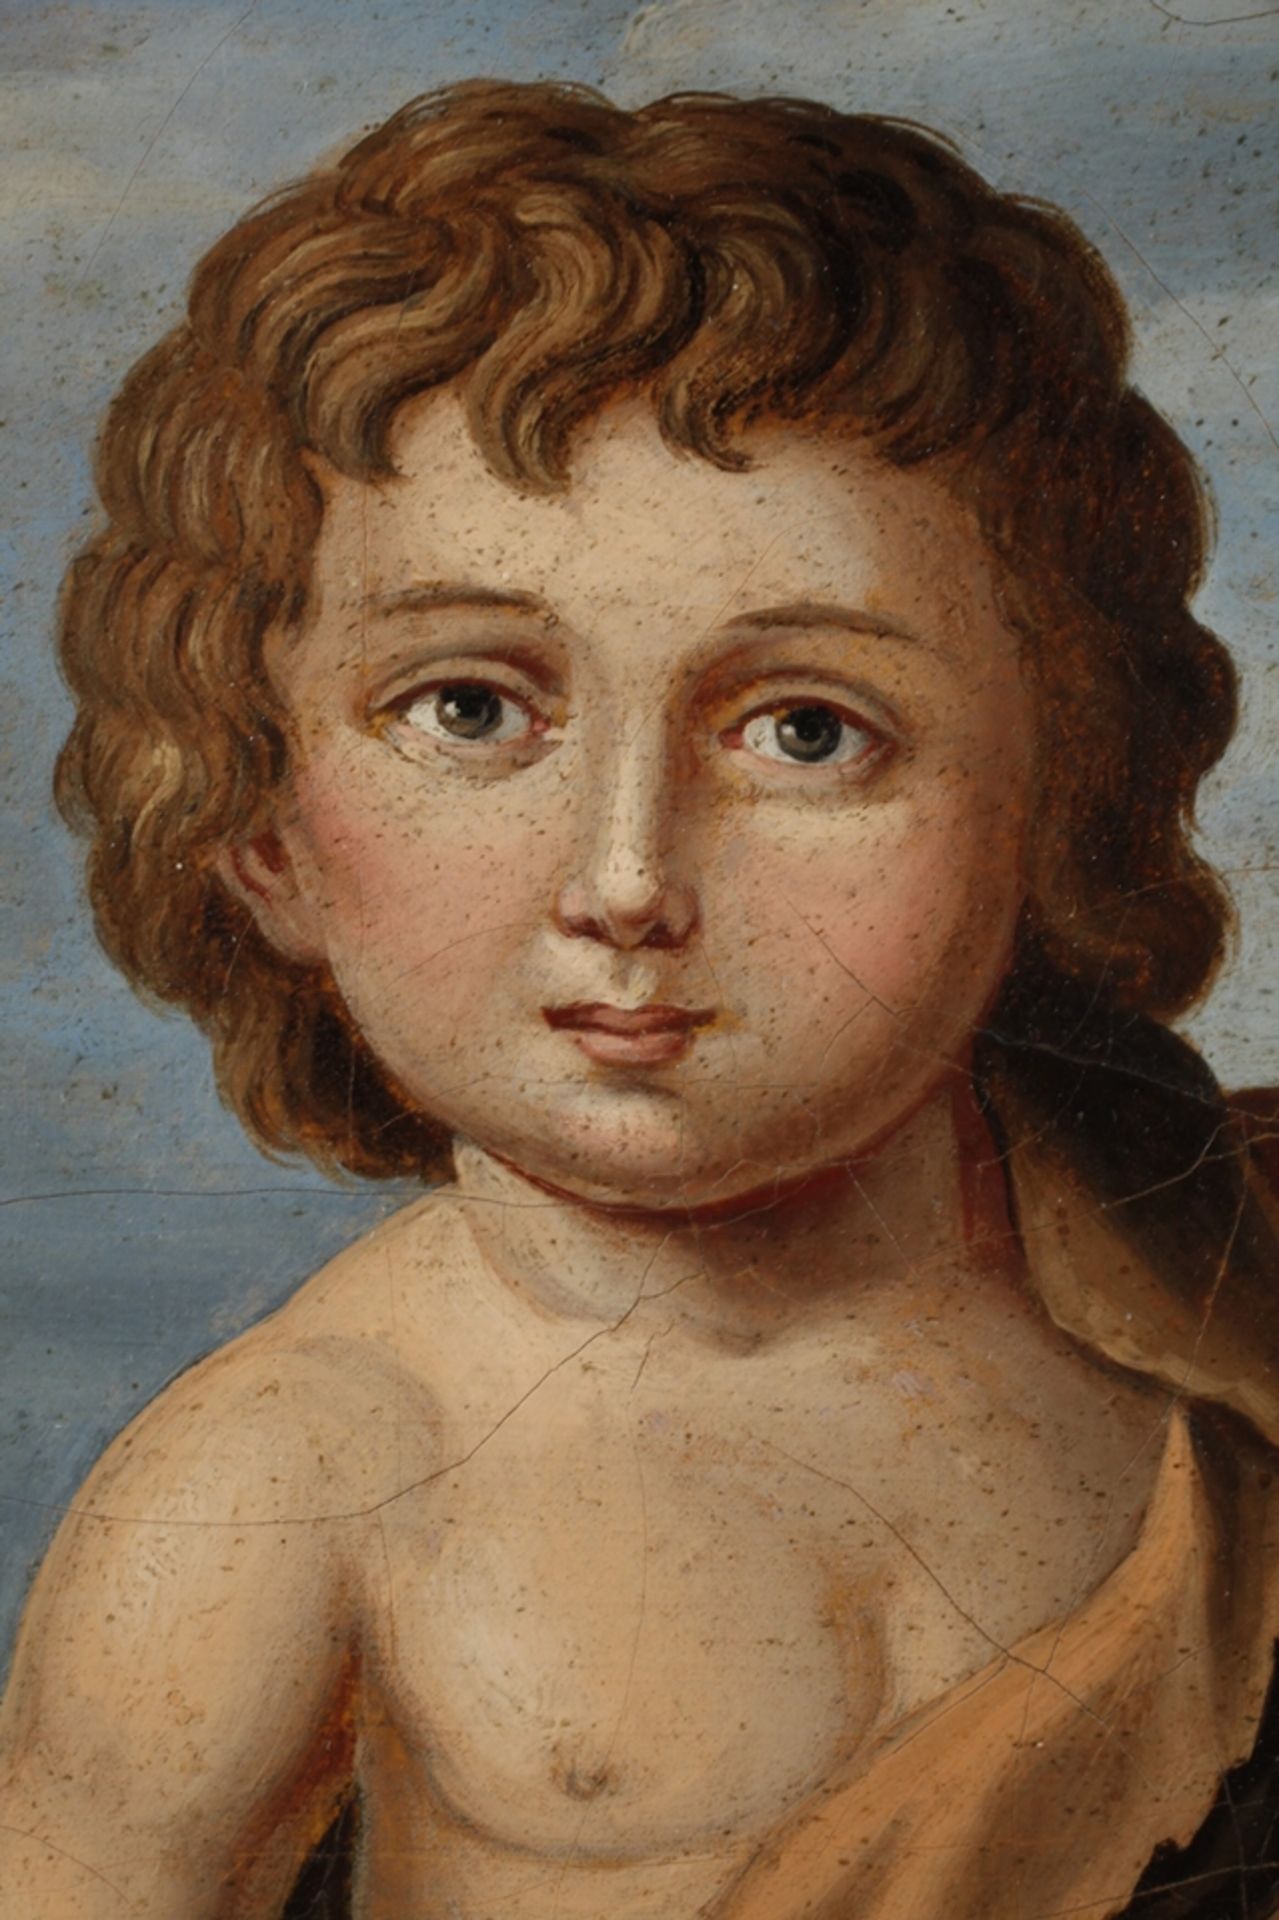 John the Baptist as a Child with the Lamb - Image 3 of 6